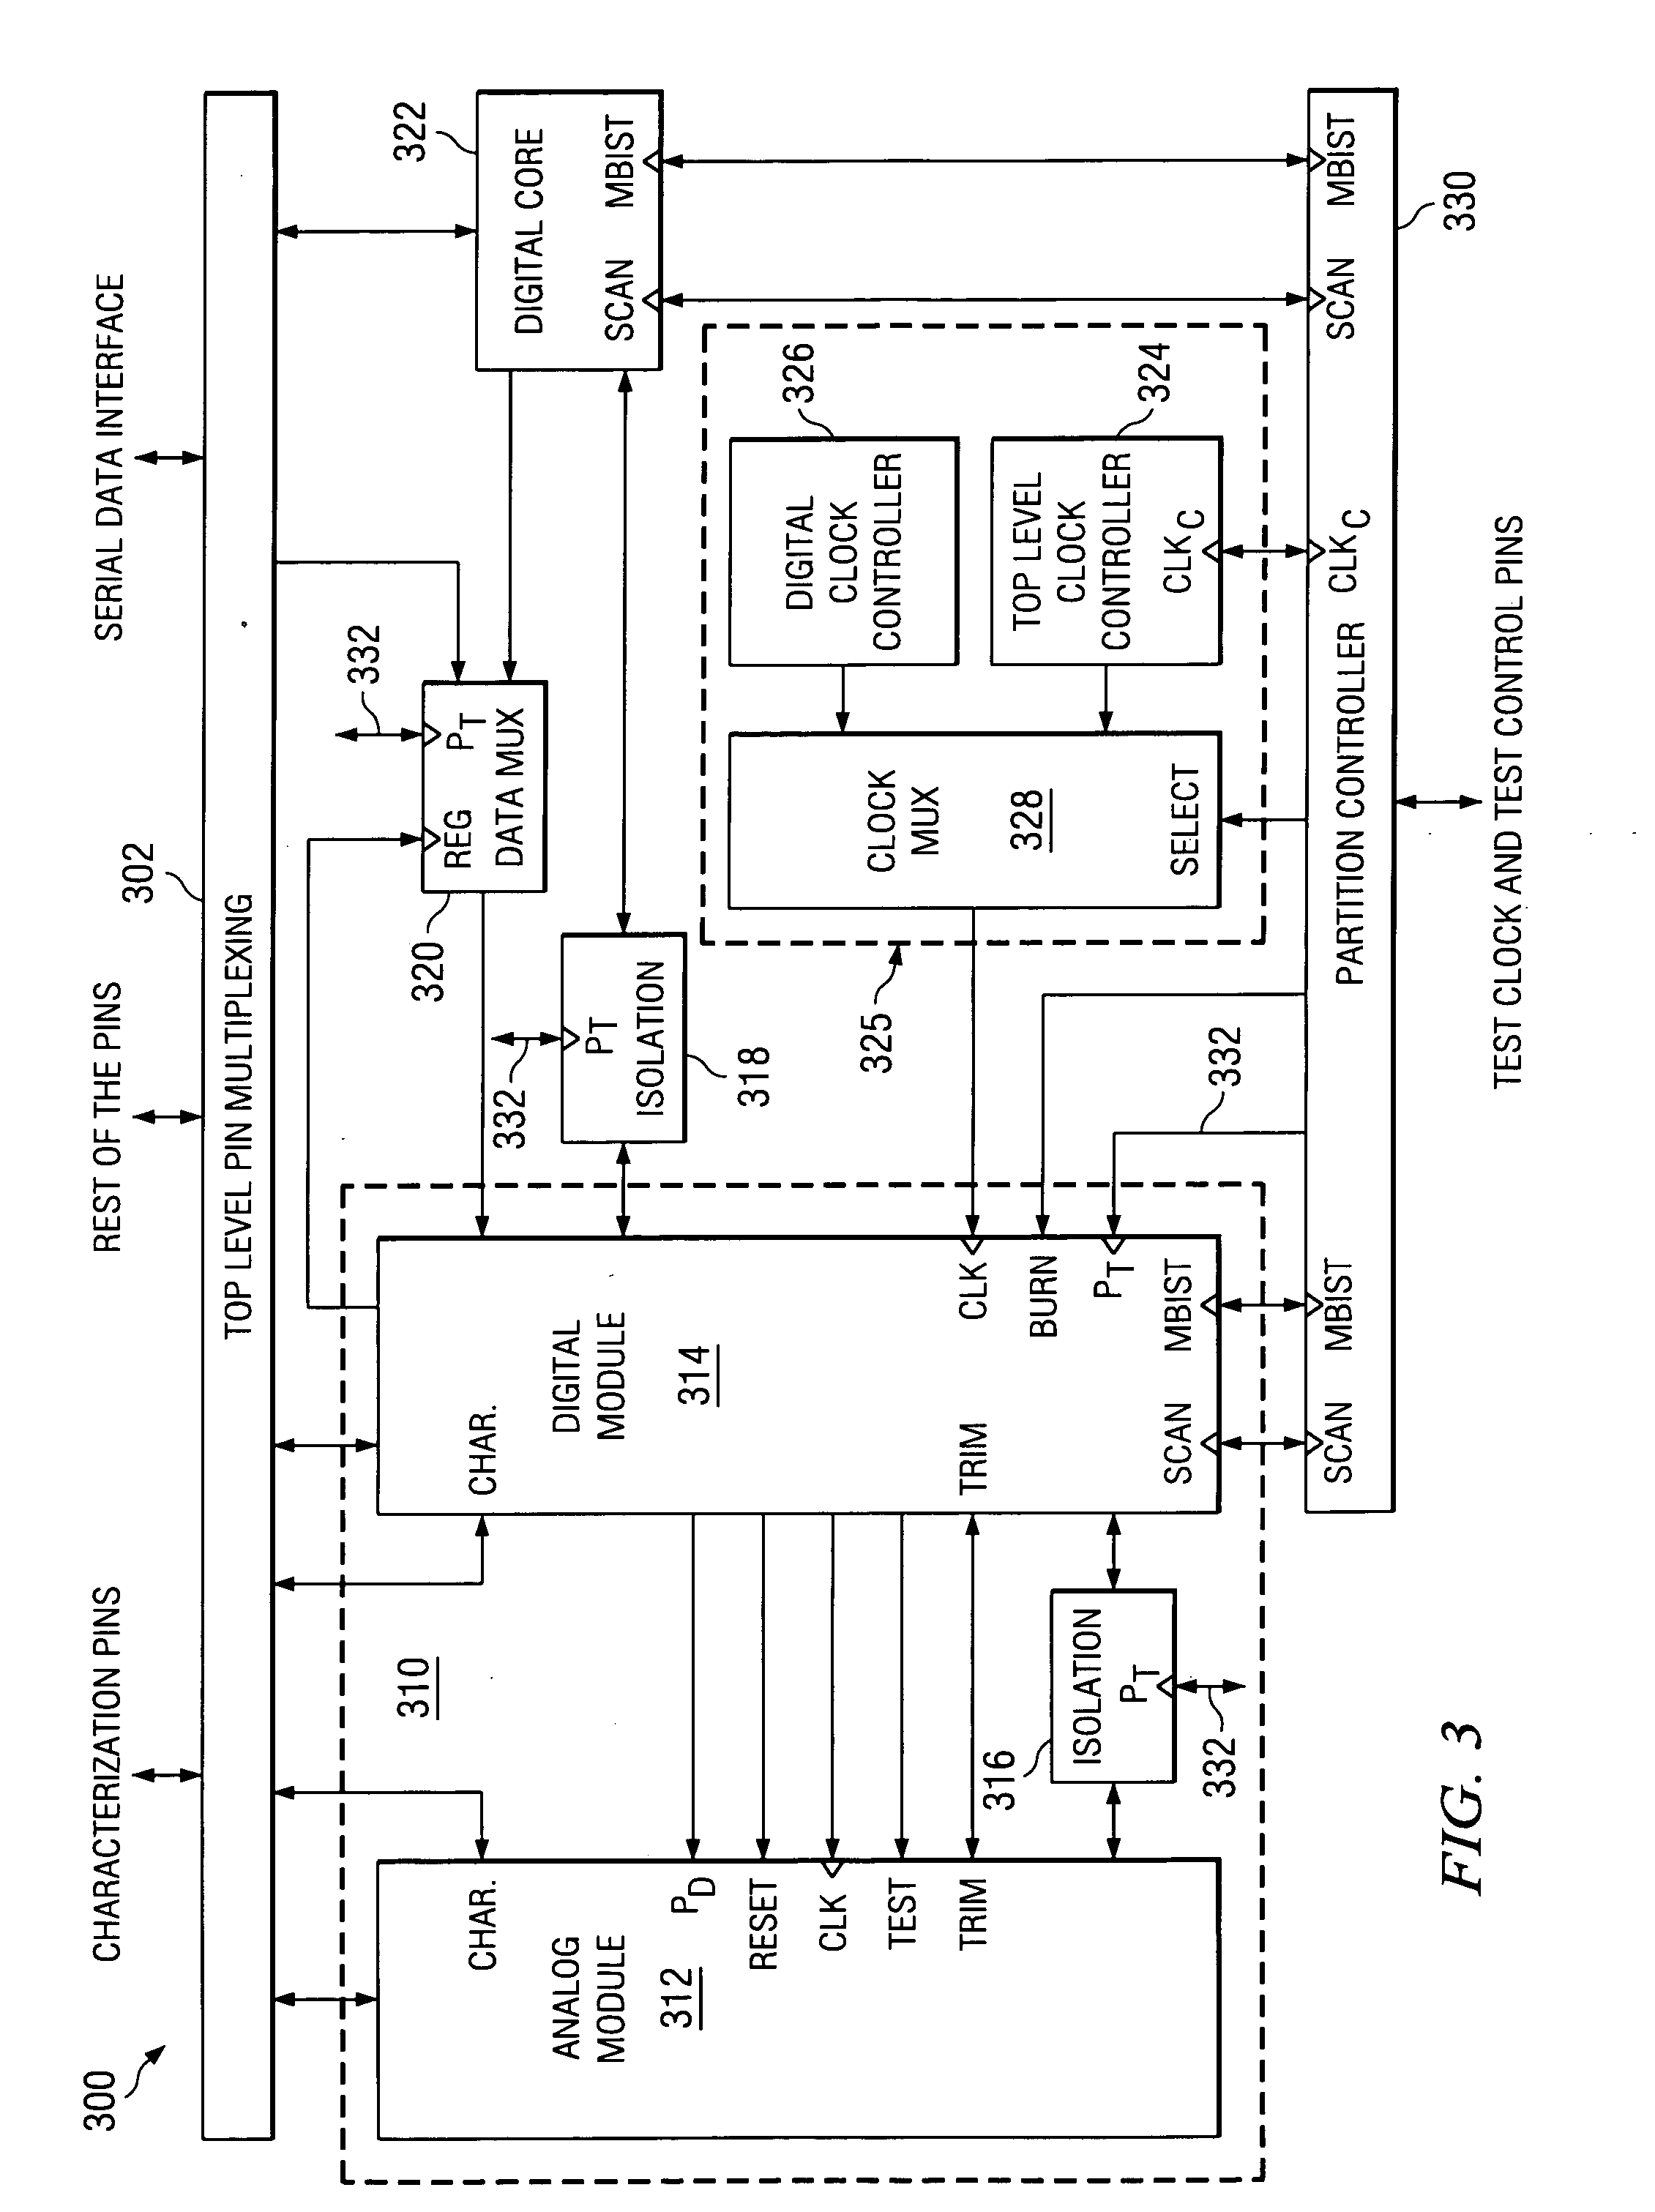 Mixed-signal core design for concurrent testing of mixed-signal, analog, and digital components